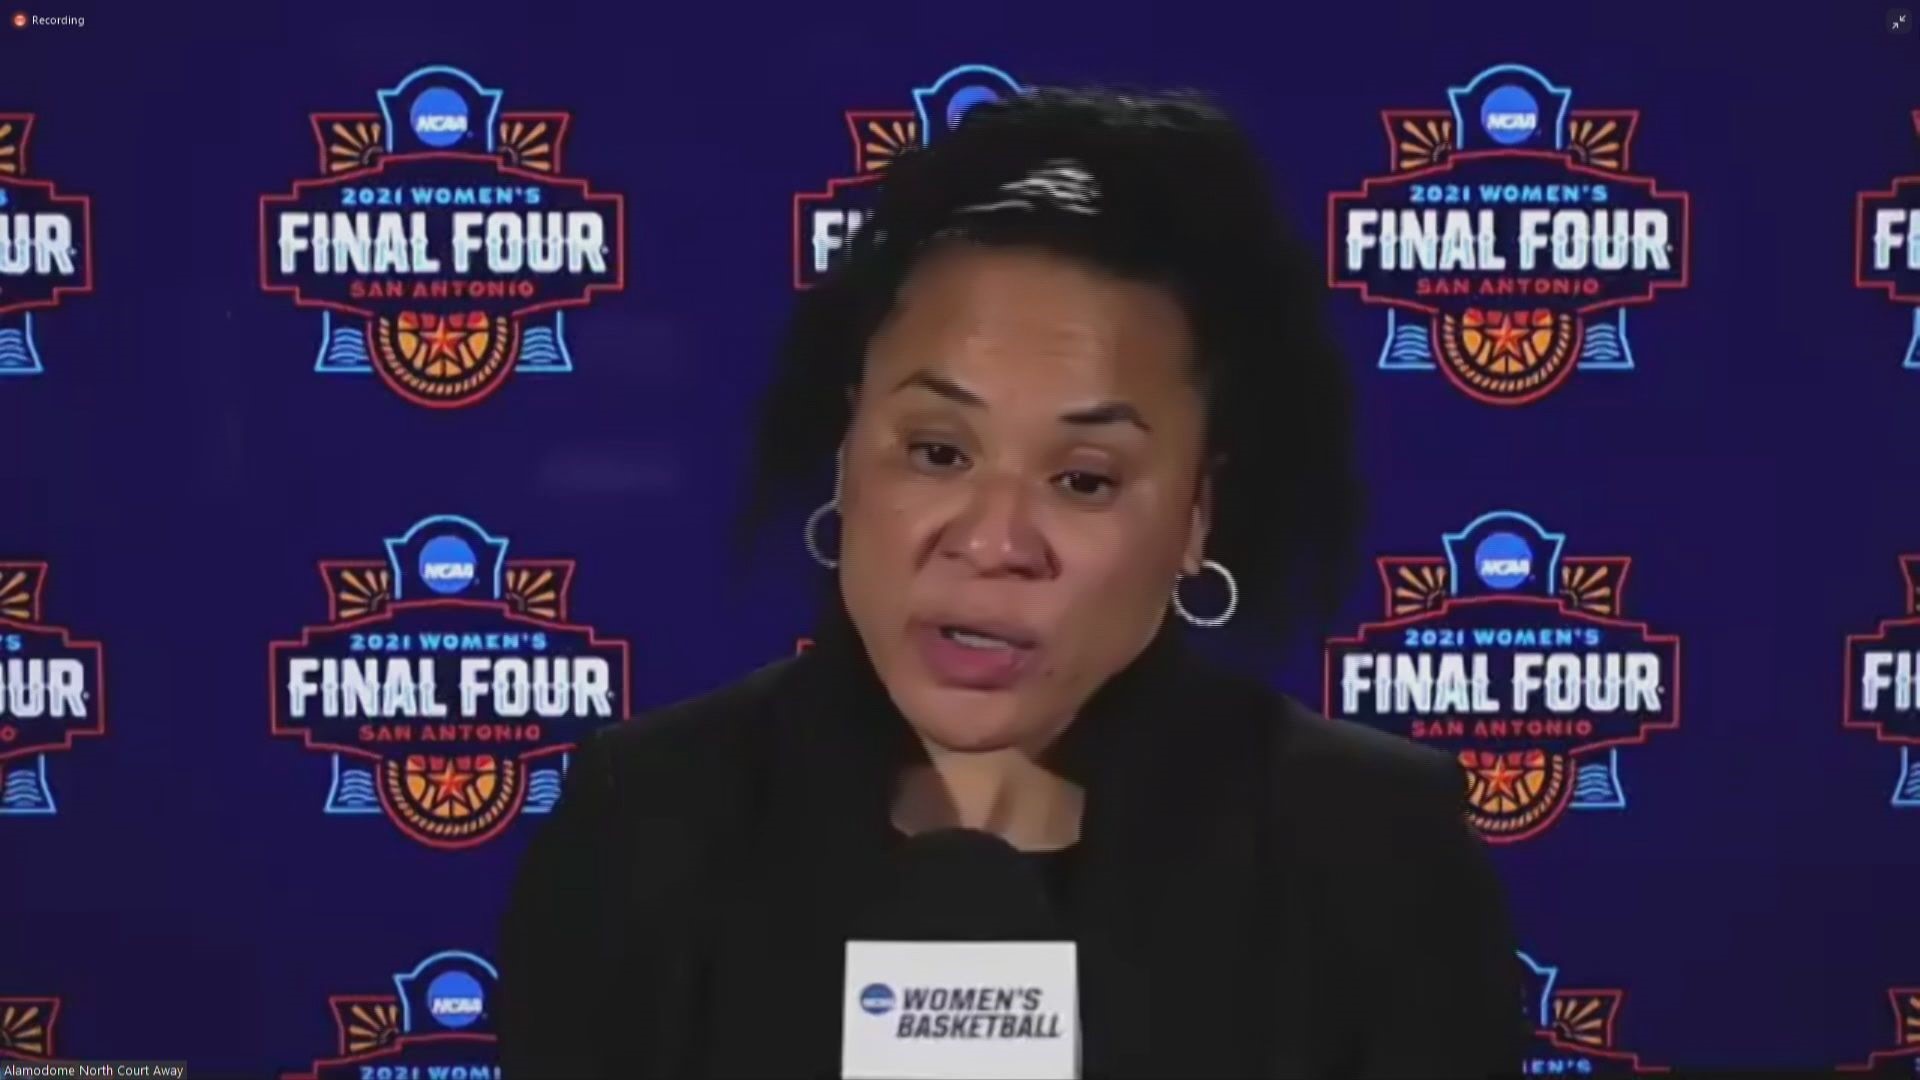 South Carolina Coach Dawn Staley comments on her team's loss to Stanford, the no call on the kick ball, and stars Zia Cooke and Aliyah Boston.